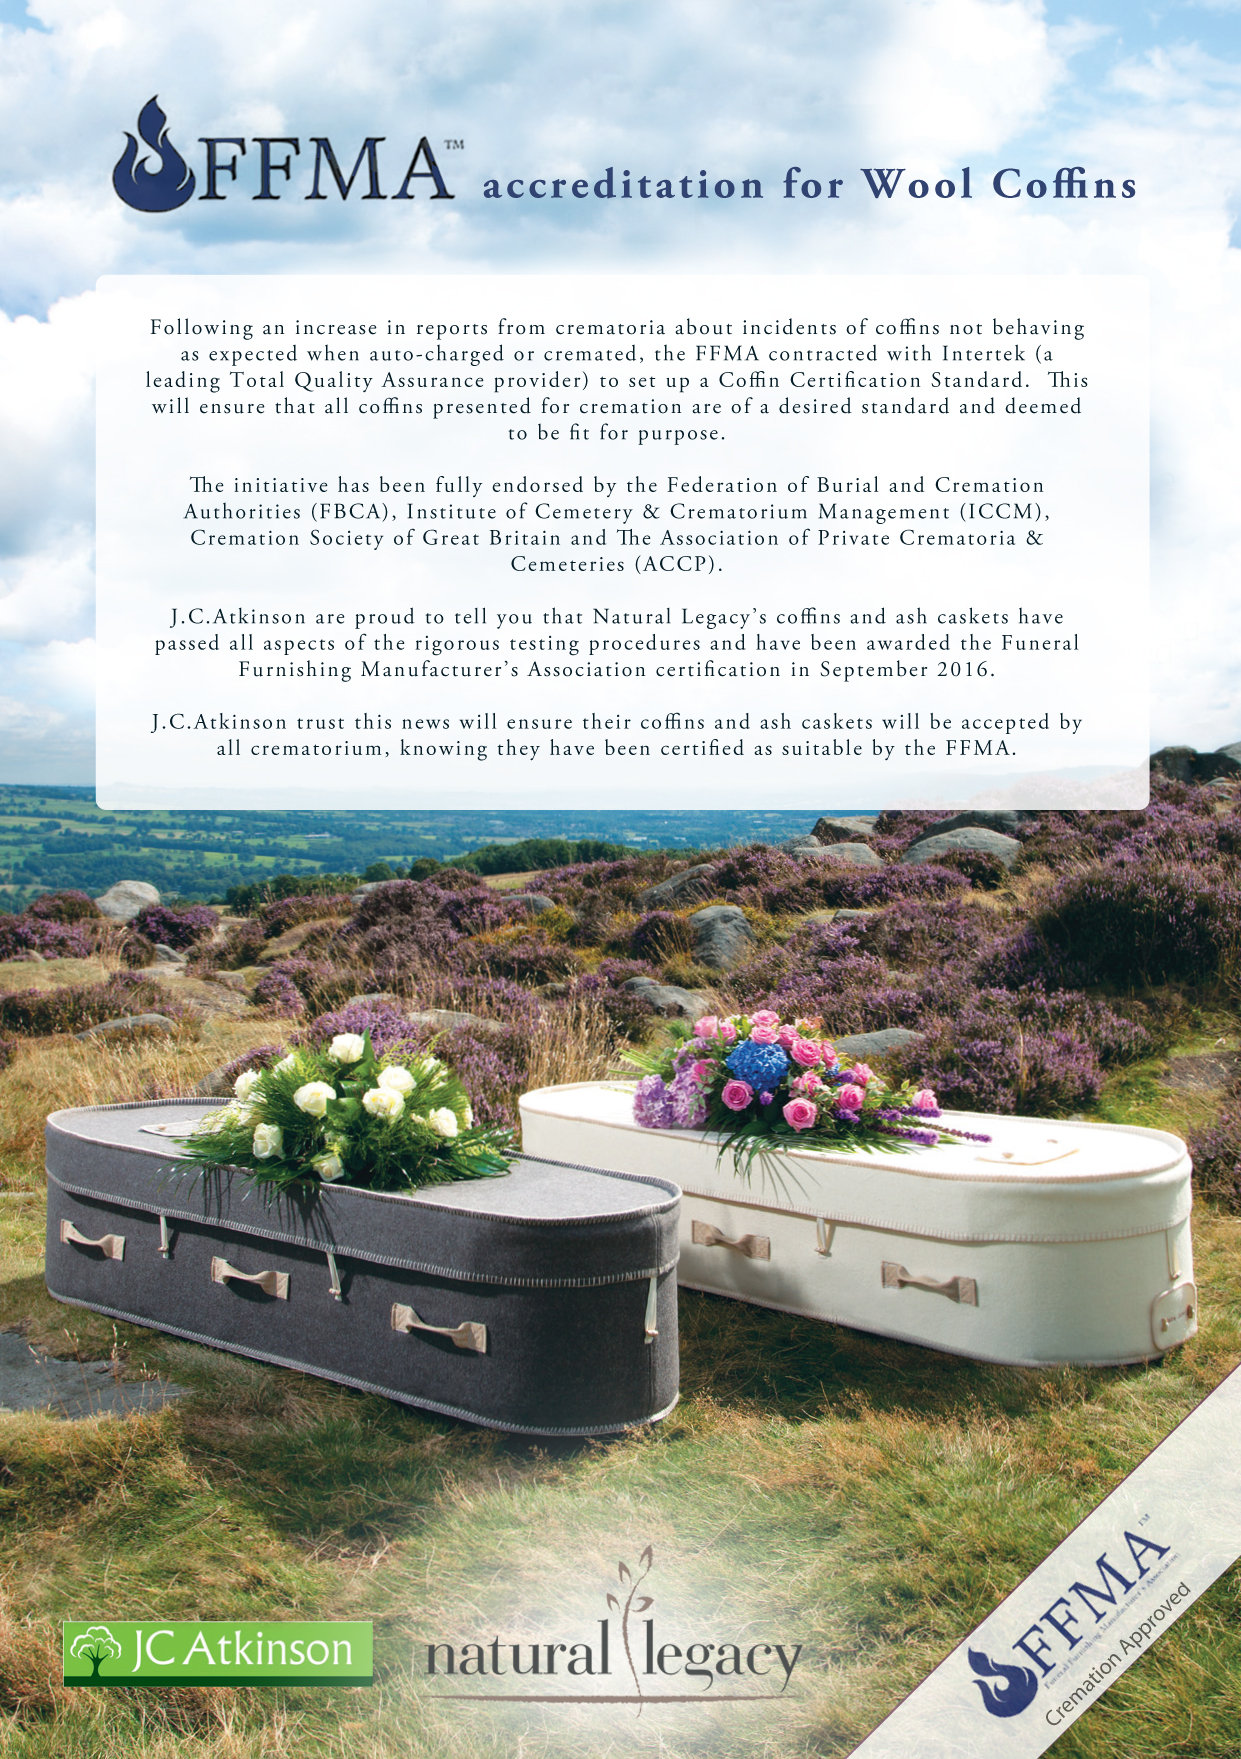 Wool Coffins now FFMA accredited